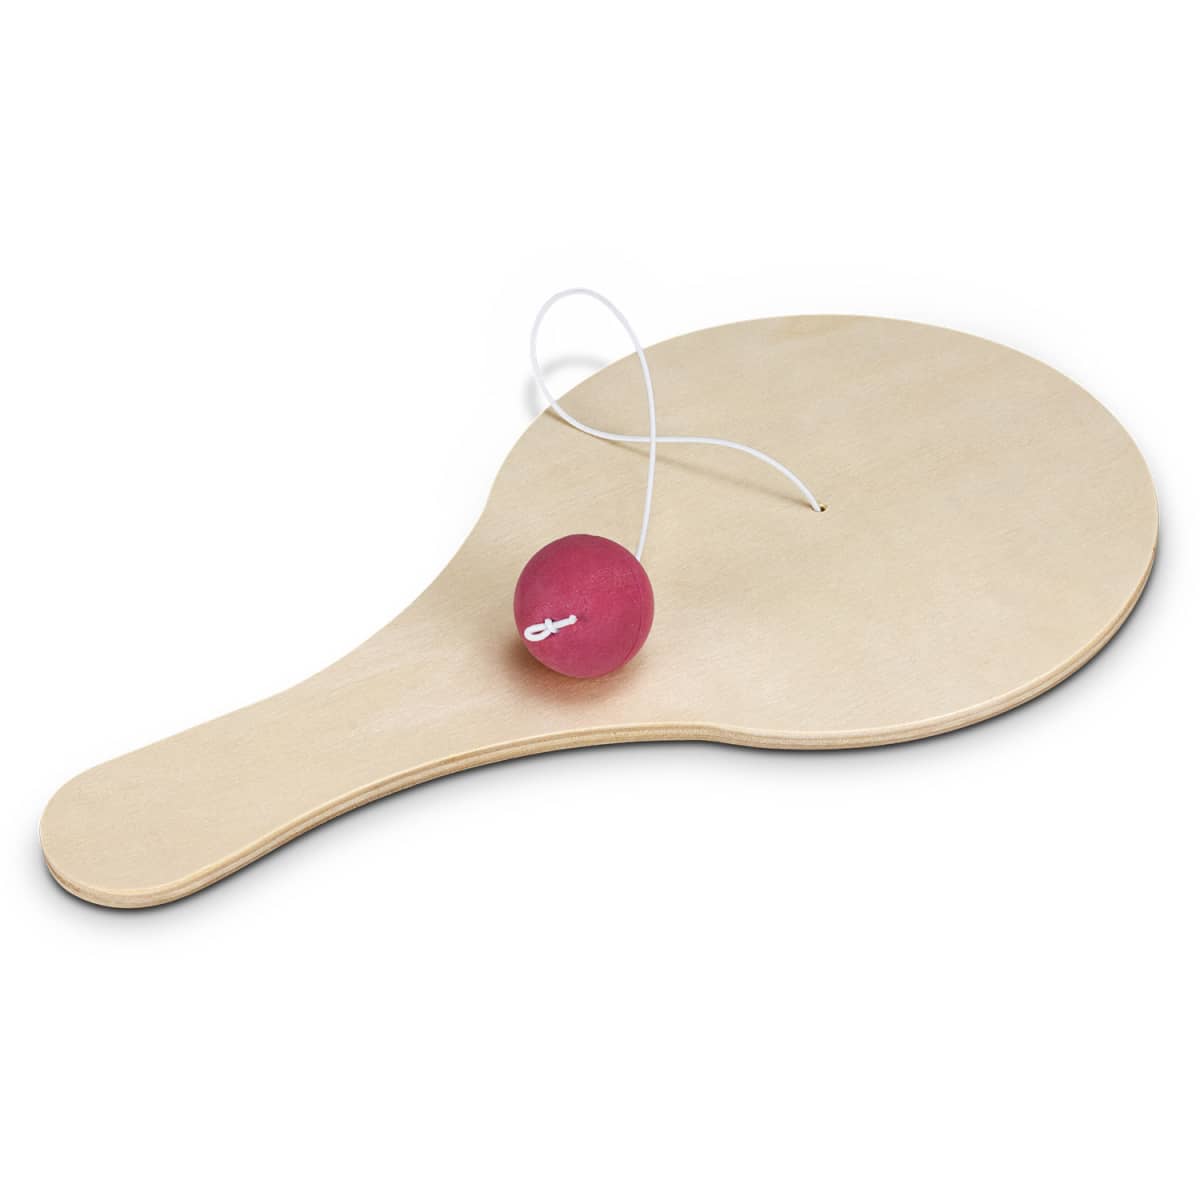 Solo Paddle Ball Game